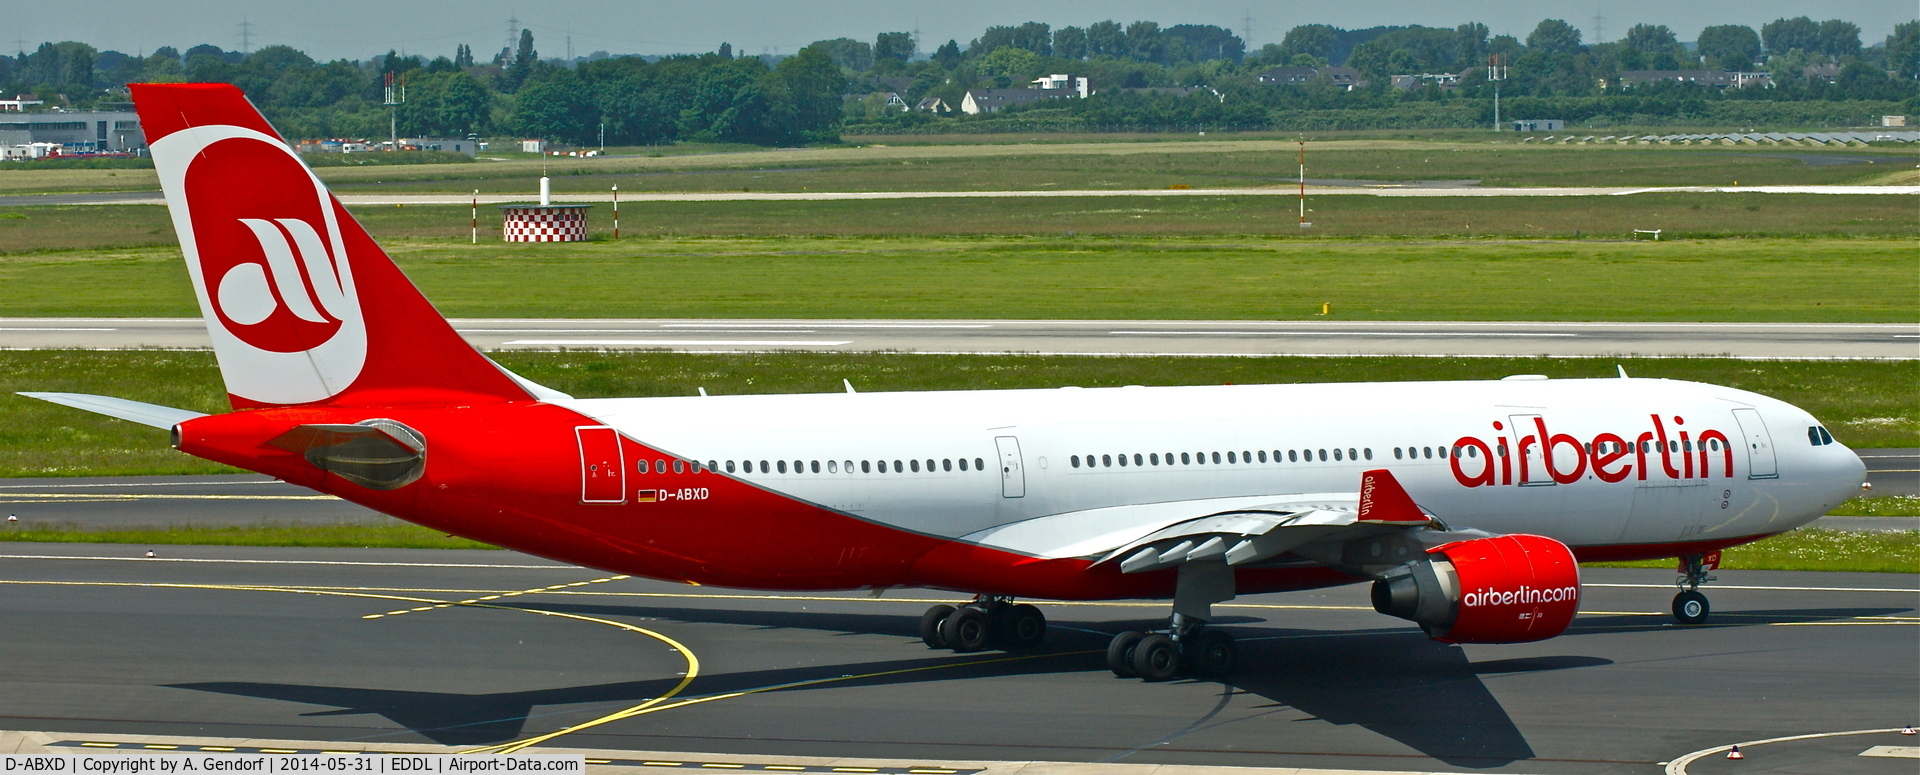 D-ABXD, 2007 Airbus A330-243 C/N 822, Air Berlin, is here on taxiway 